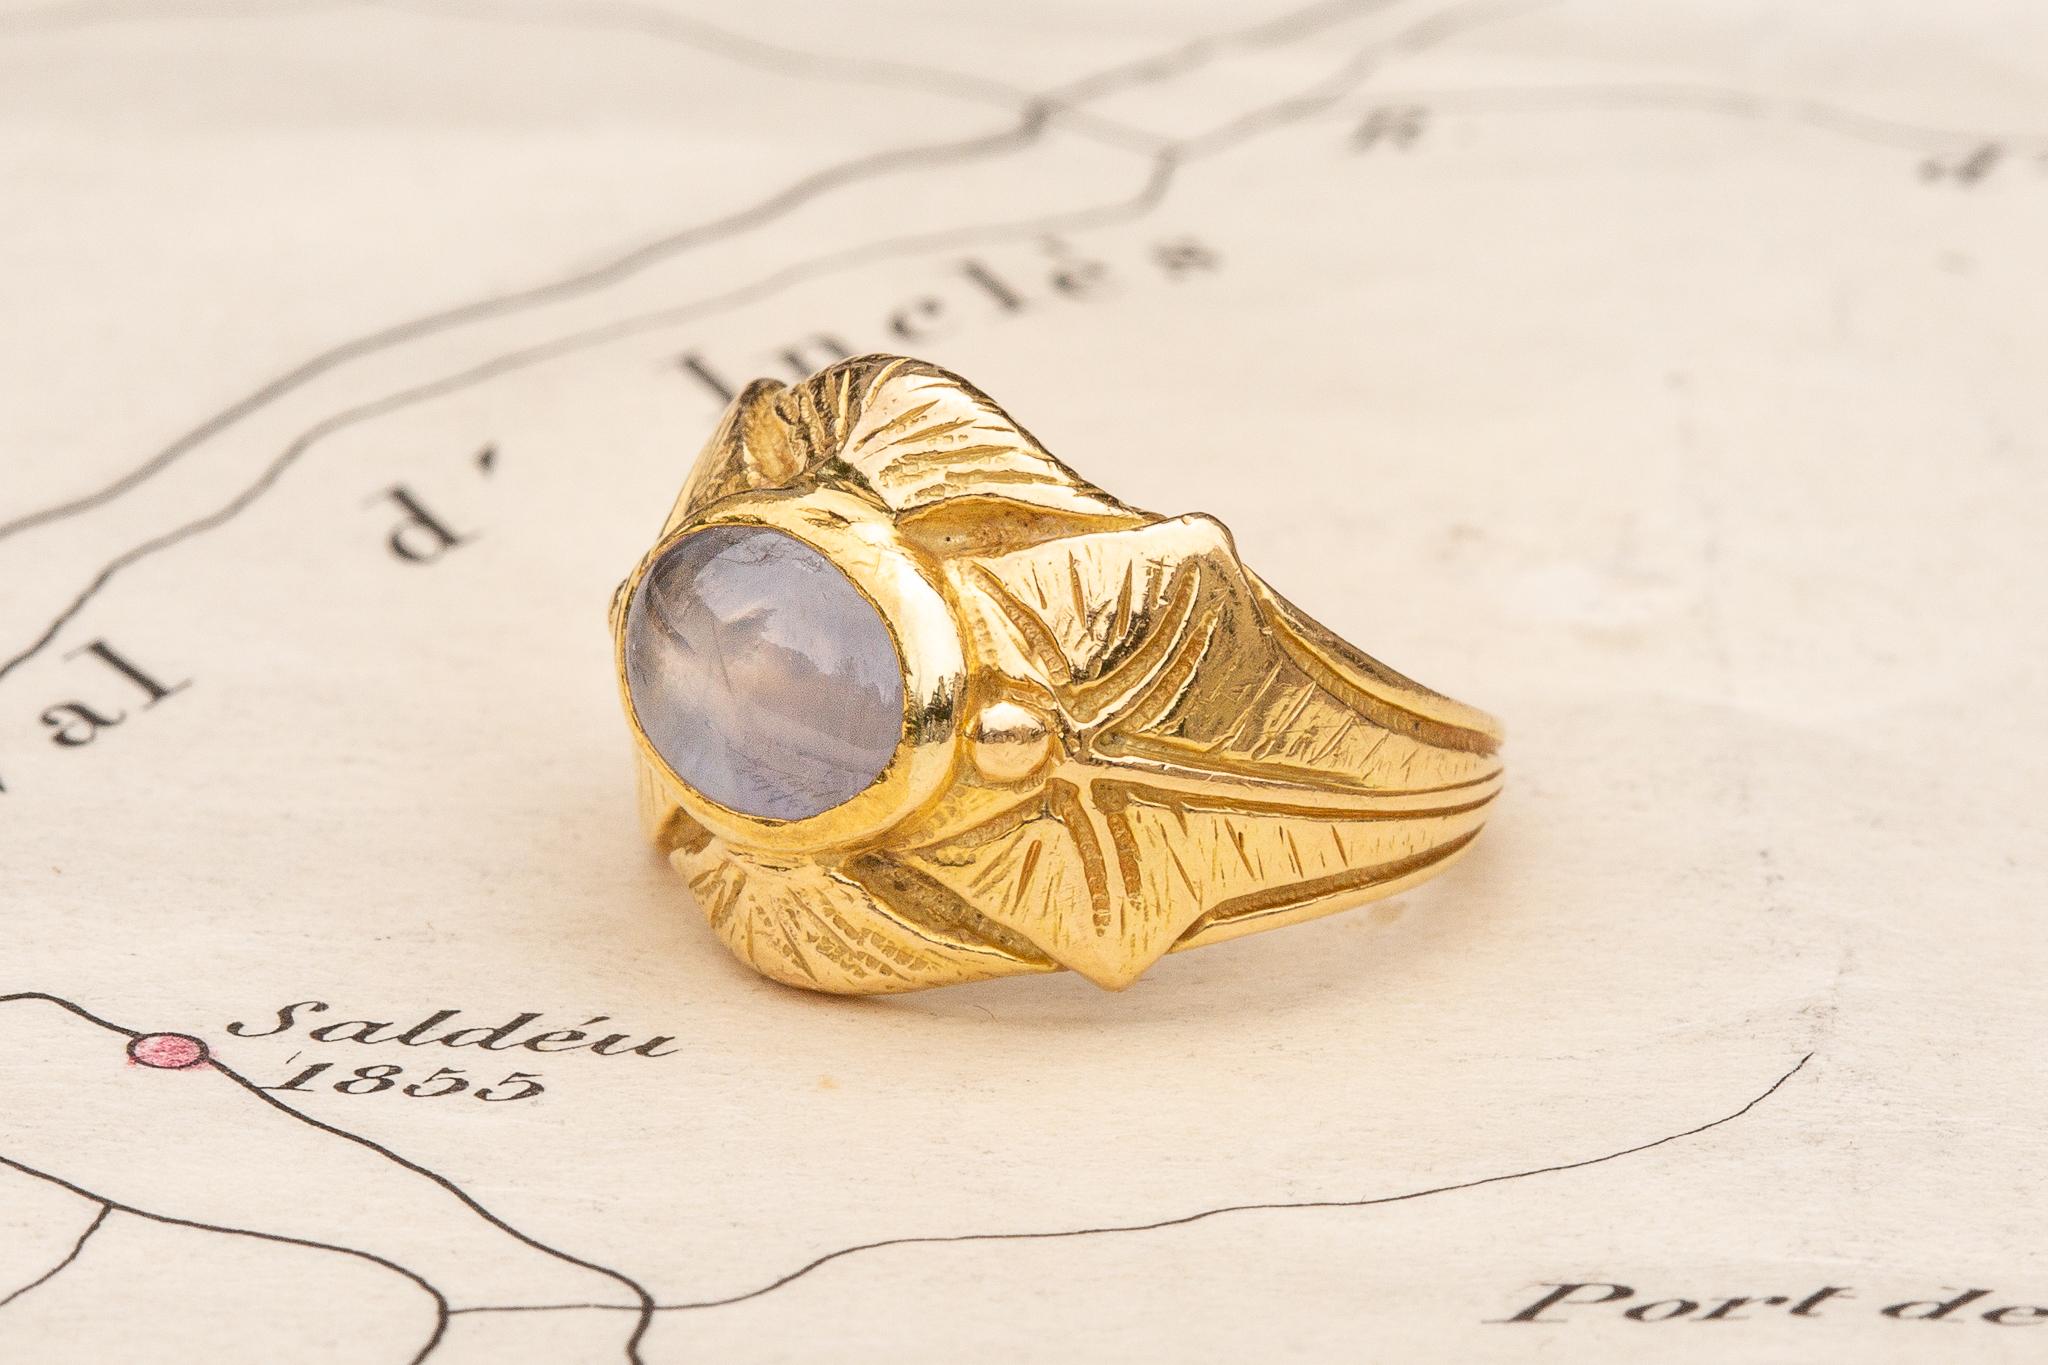 A gorgeous antique French Art Nouveau figural ring made in Paris, circa 1900. The ring is crafted in 18K yellow gold and features an 1.63ct star sapphire. 

The milky spheroid shaped lilac ‘star sapphire’ displays asterism, a rare optical phenomenon